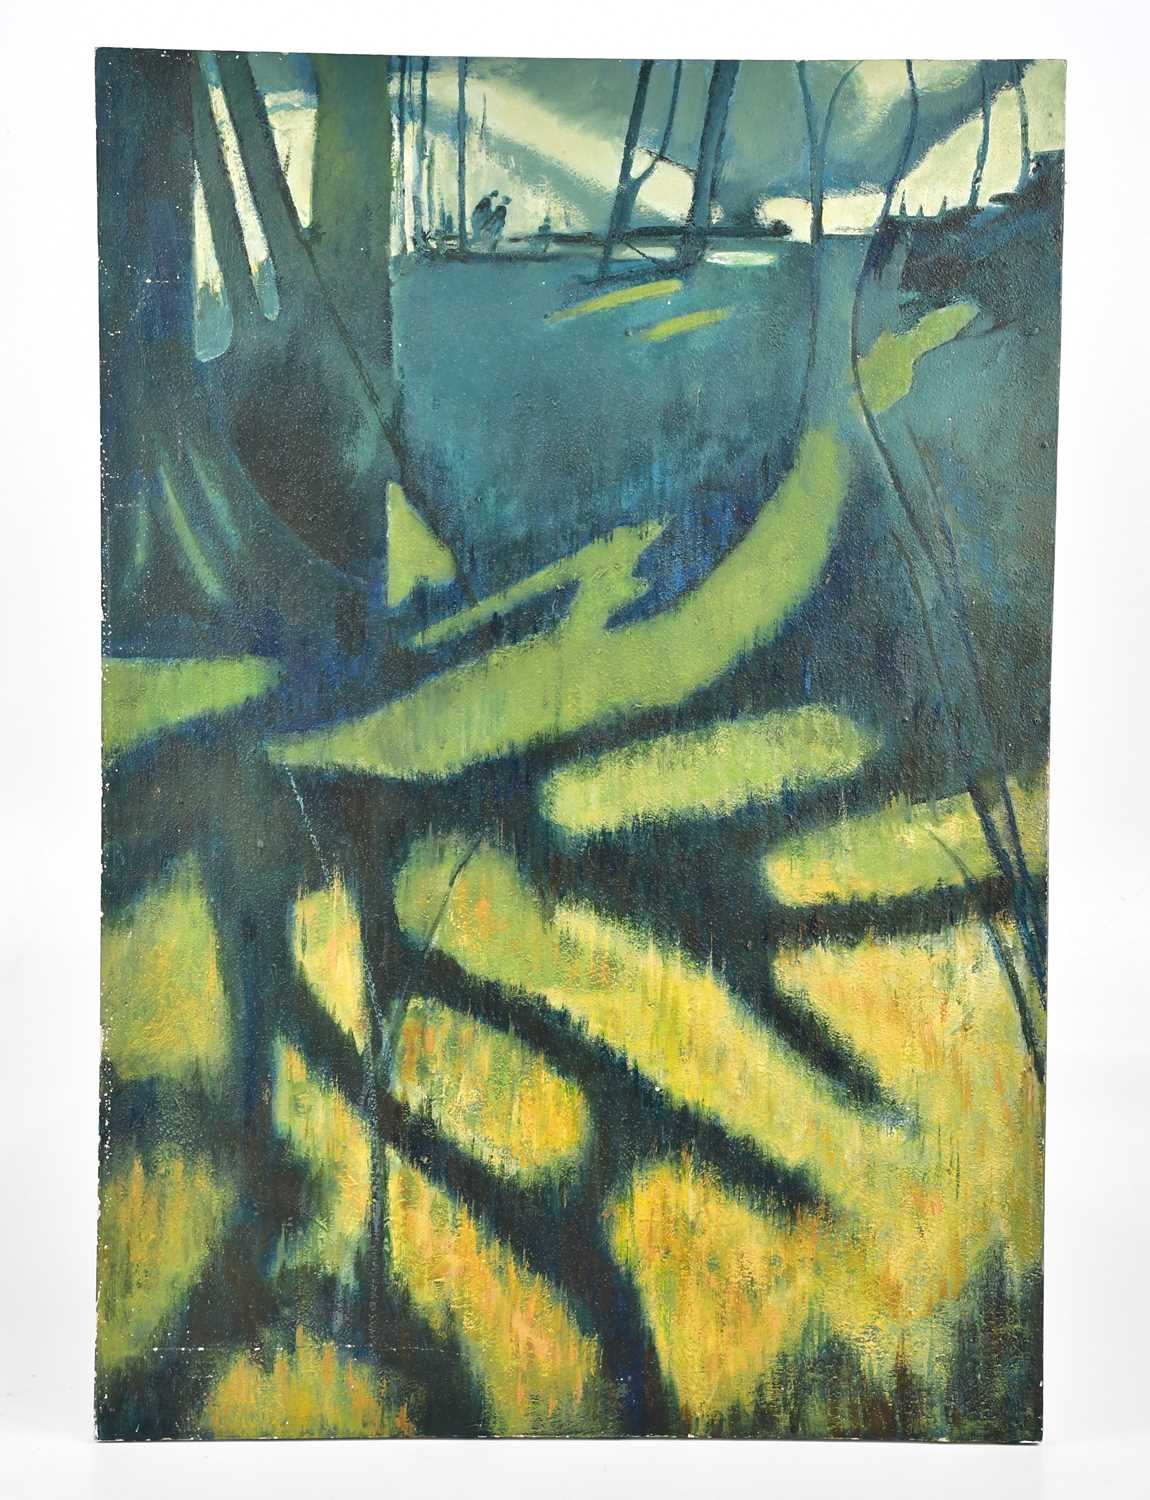 † JUNE BEVAN; oil on canvas, 'Trees and Shadows', unsigned, 76 x 53cm, unframed.